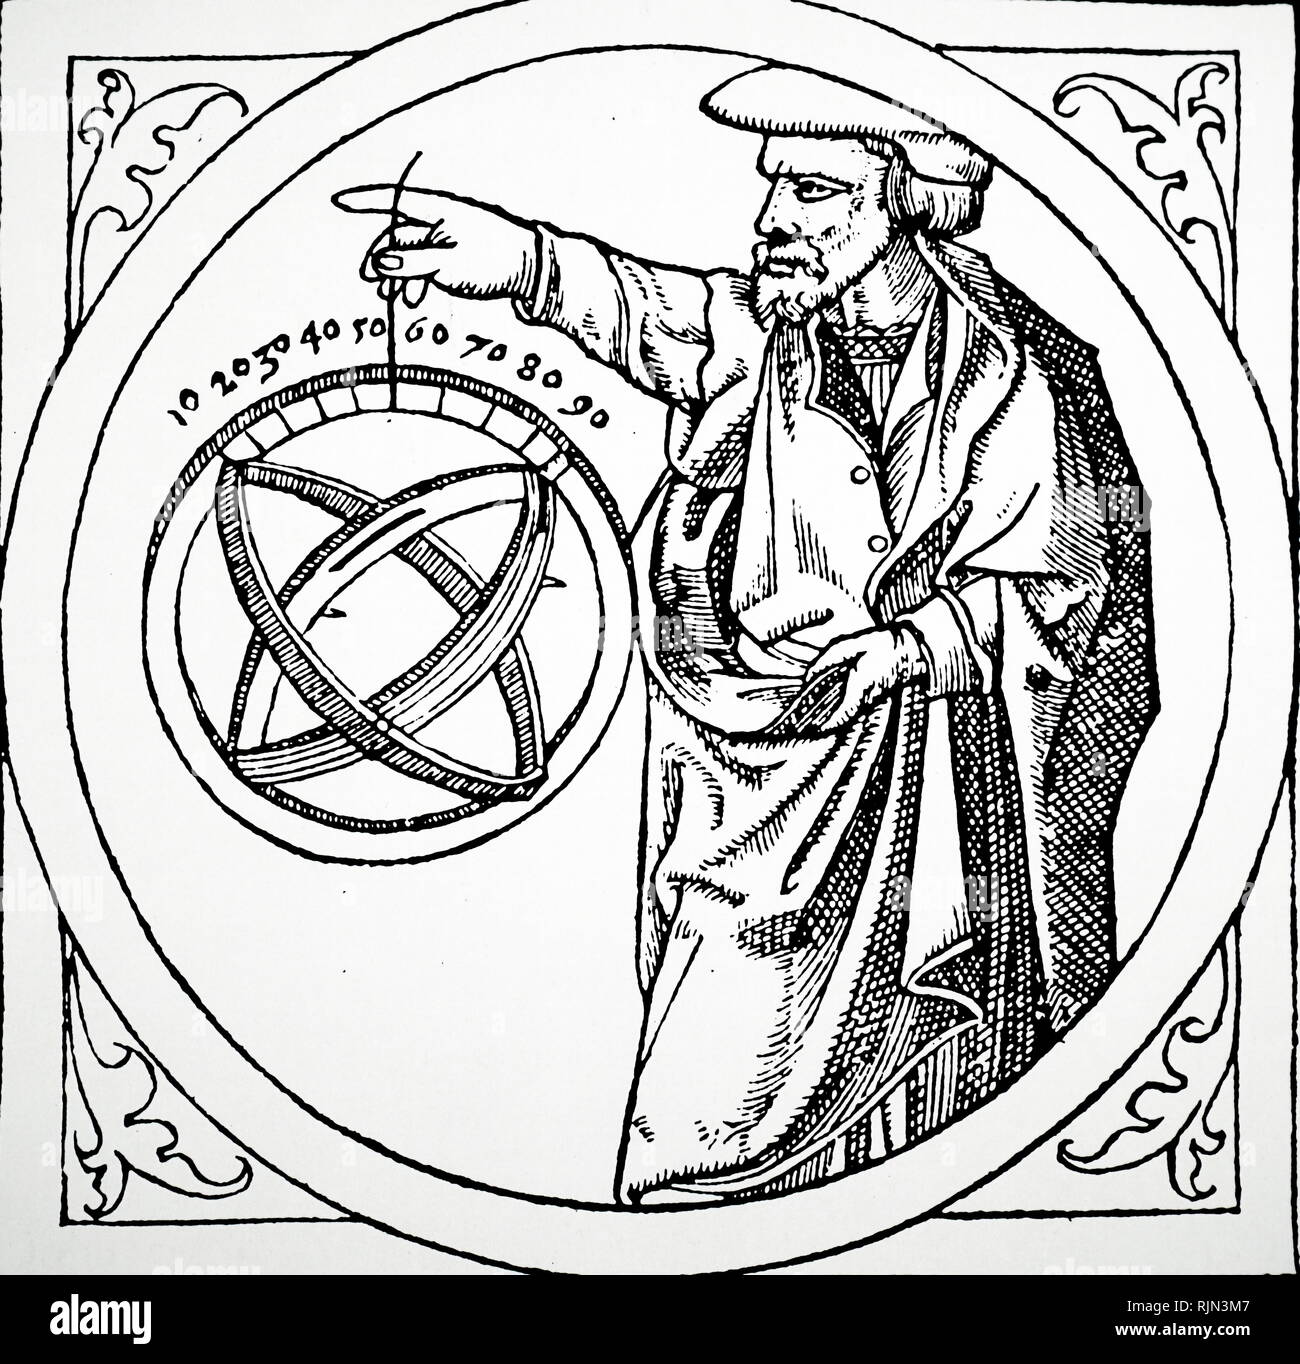 Illustration showing Gemma Frisius (1508 – 1555), Dutch physician, mathematician, cartographer, philosopher, and instrument maker. He created important globes, improved the mathematical instruments of his day and applied mathematics in new ways to surveying and navigation. Gemma's rings are named after him. Along with Gerardus Mercator and Abraham Ortelius, Frisius is often considered one of the founders of the Netherlandish school of cartography and significantly helped lay the foundations for the school's golden age Stock Photo